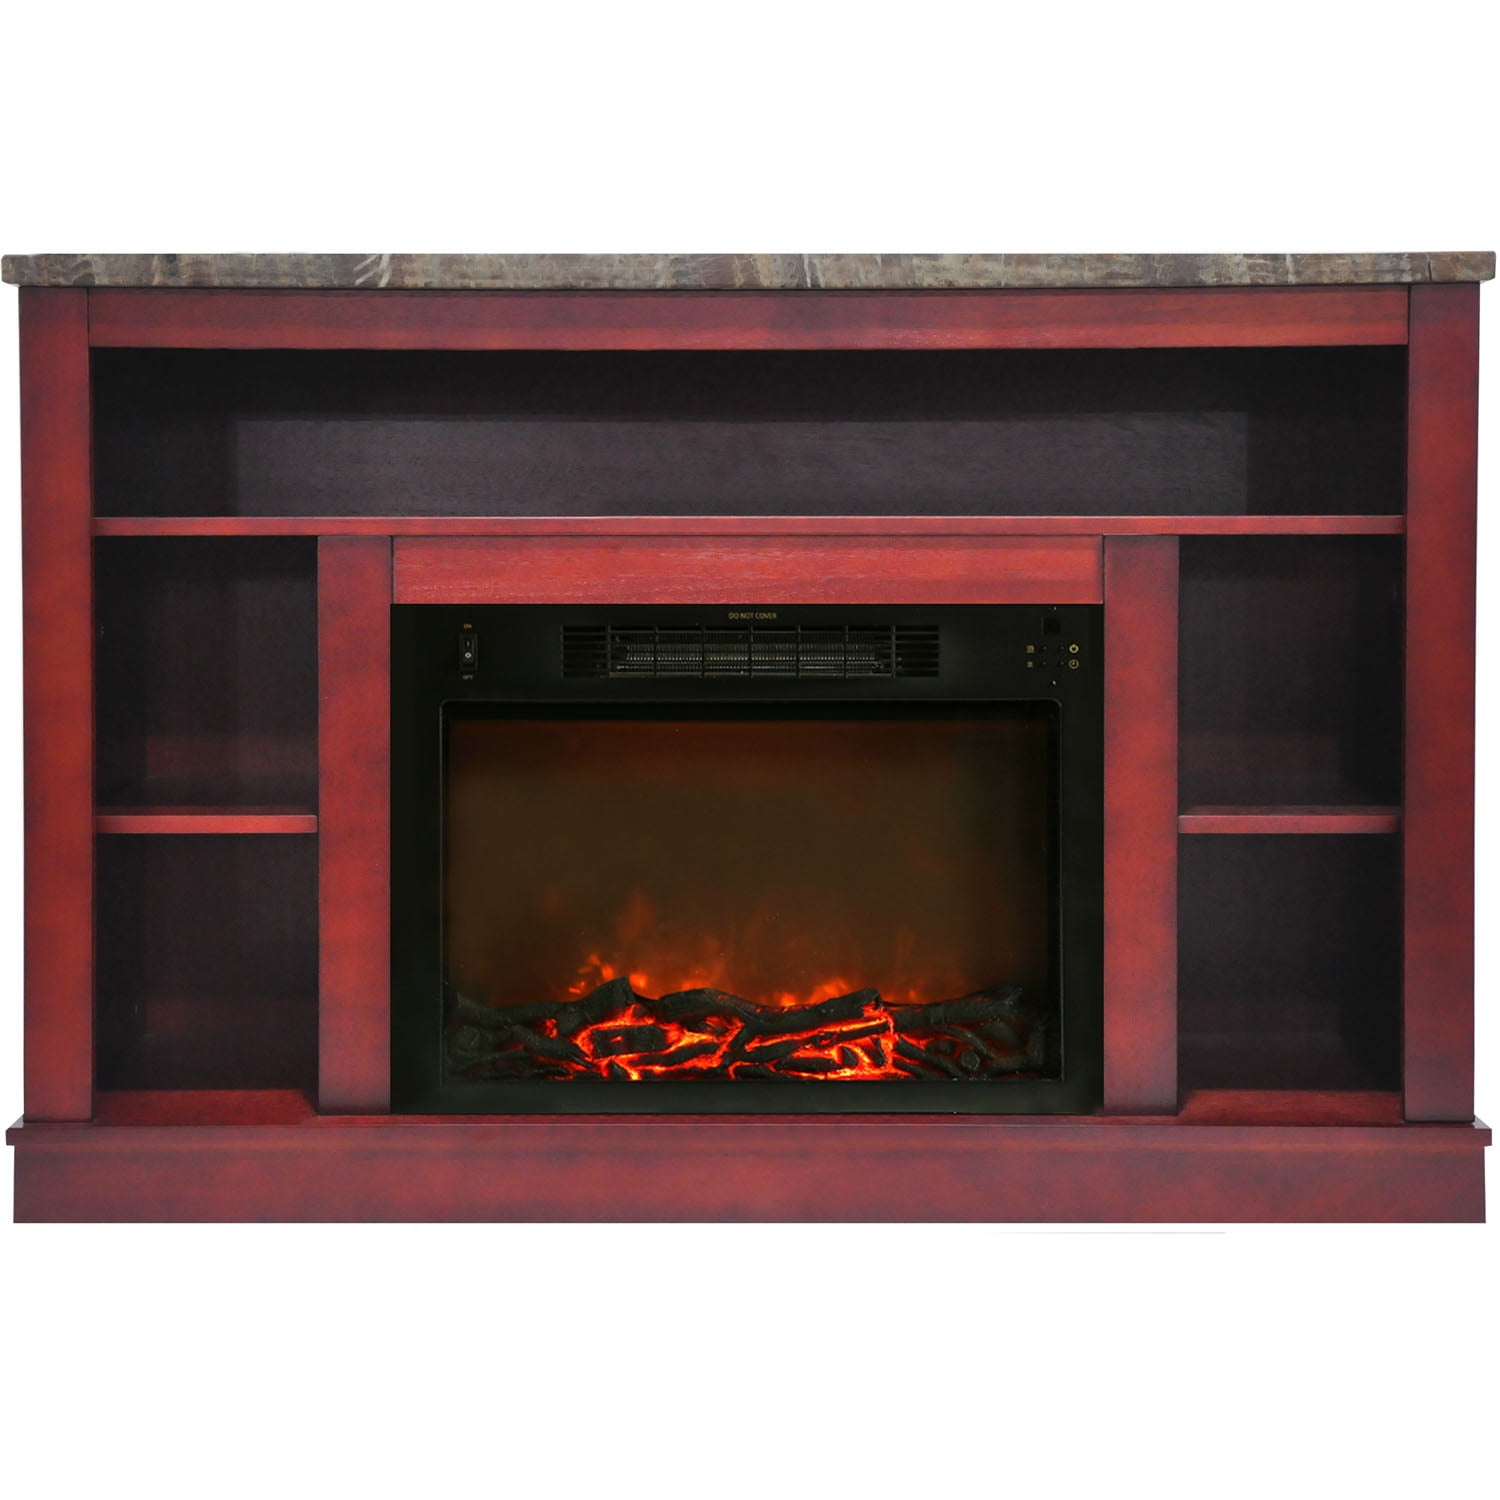 Hanover Oxford 47 In. Electric Fireplace with a 1500W Log Insert and